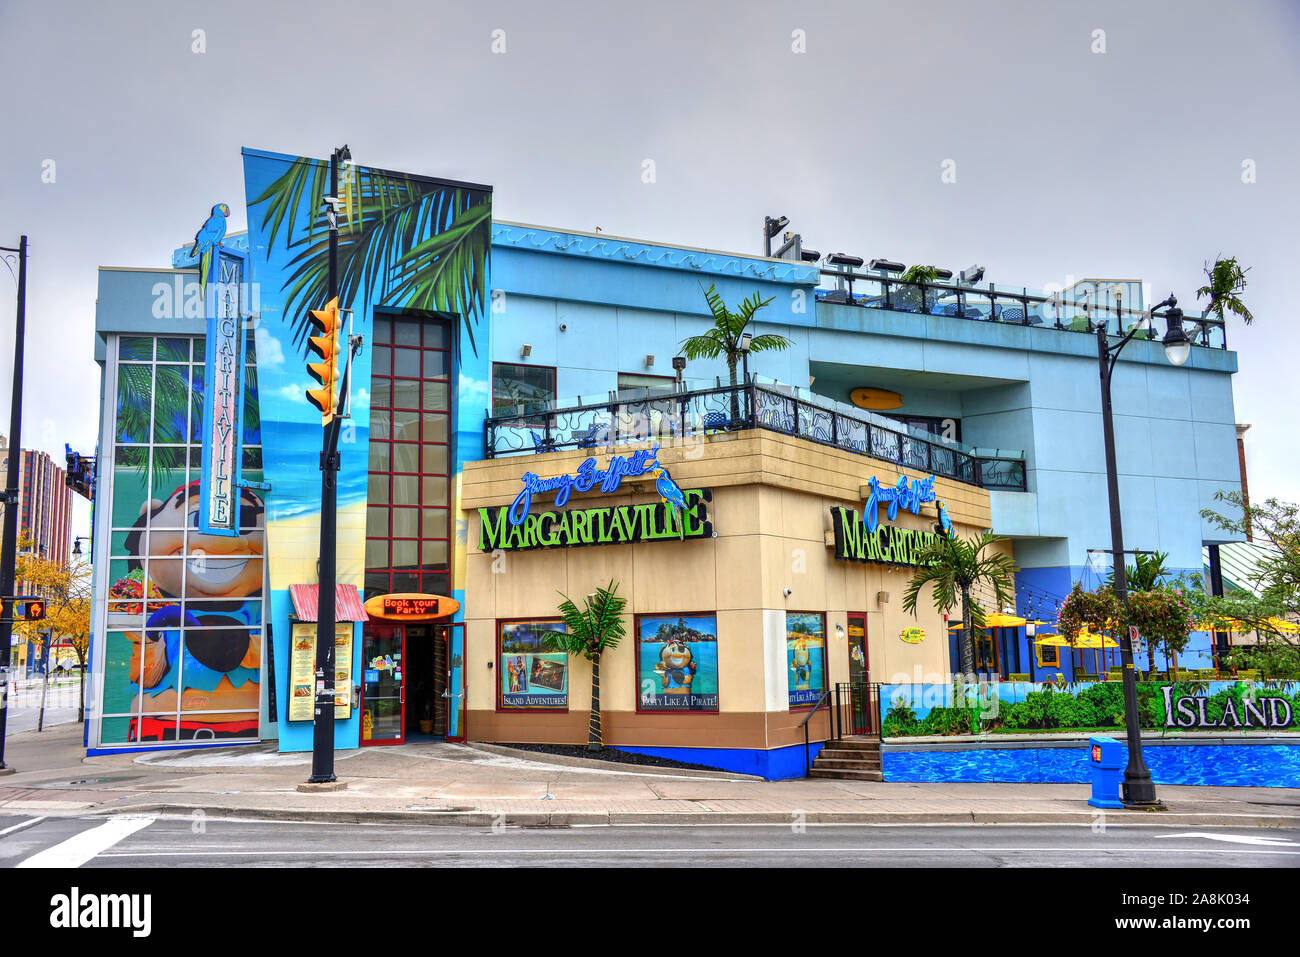 Niagara Falls, Canada - October 2, 2019: Jimmy Buffet’s Margaritaville restaurant and bar on Fallsview Blvd is   one of a popular chain of casual dini Stock Photo